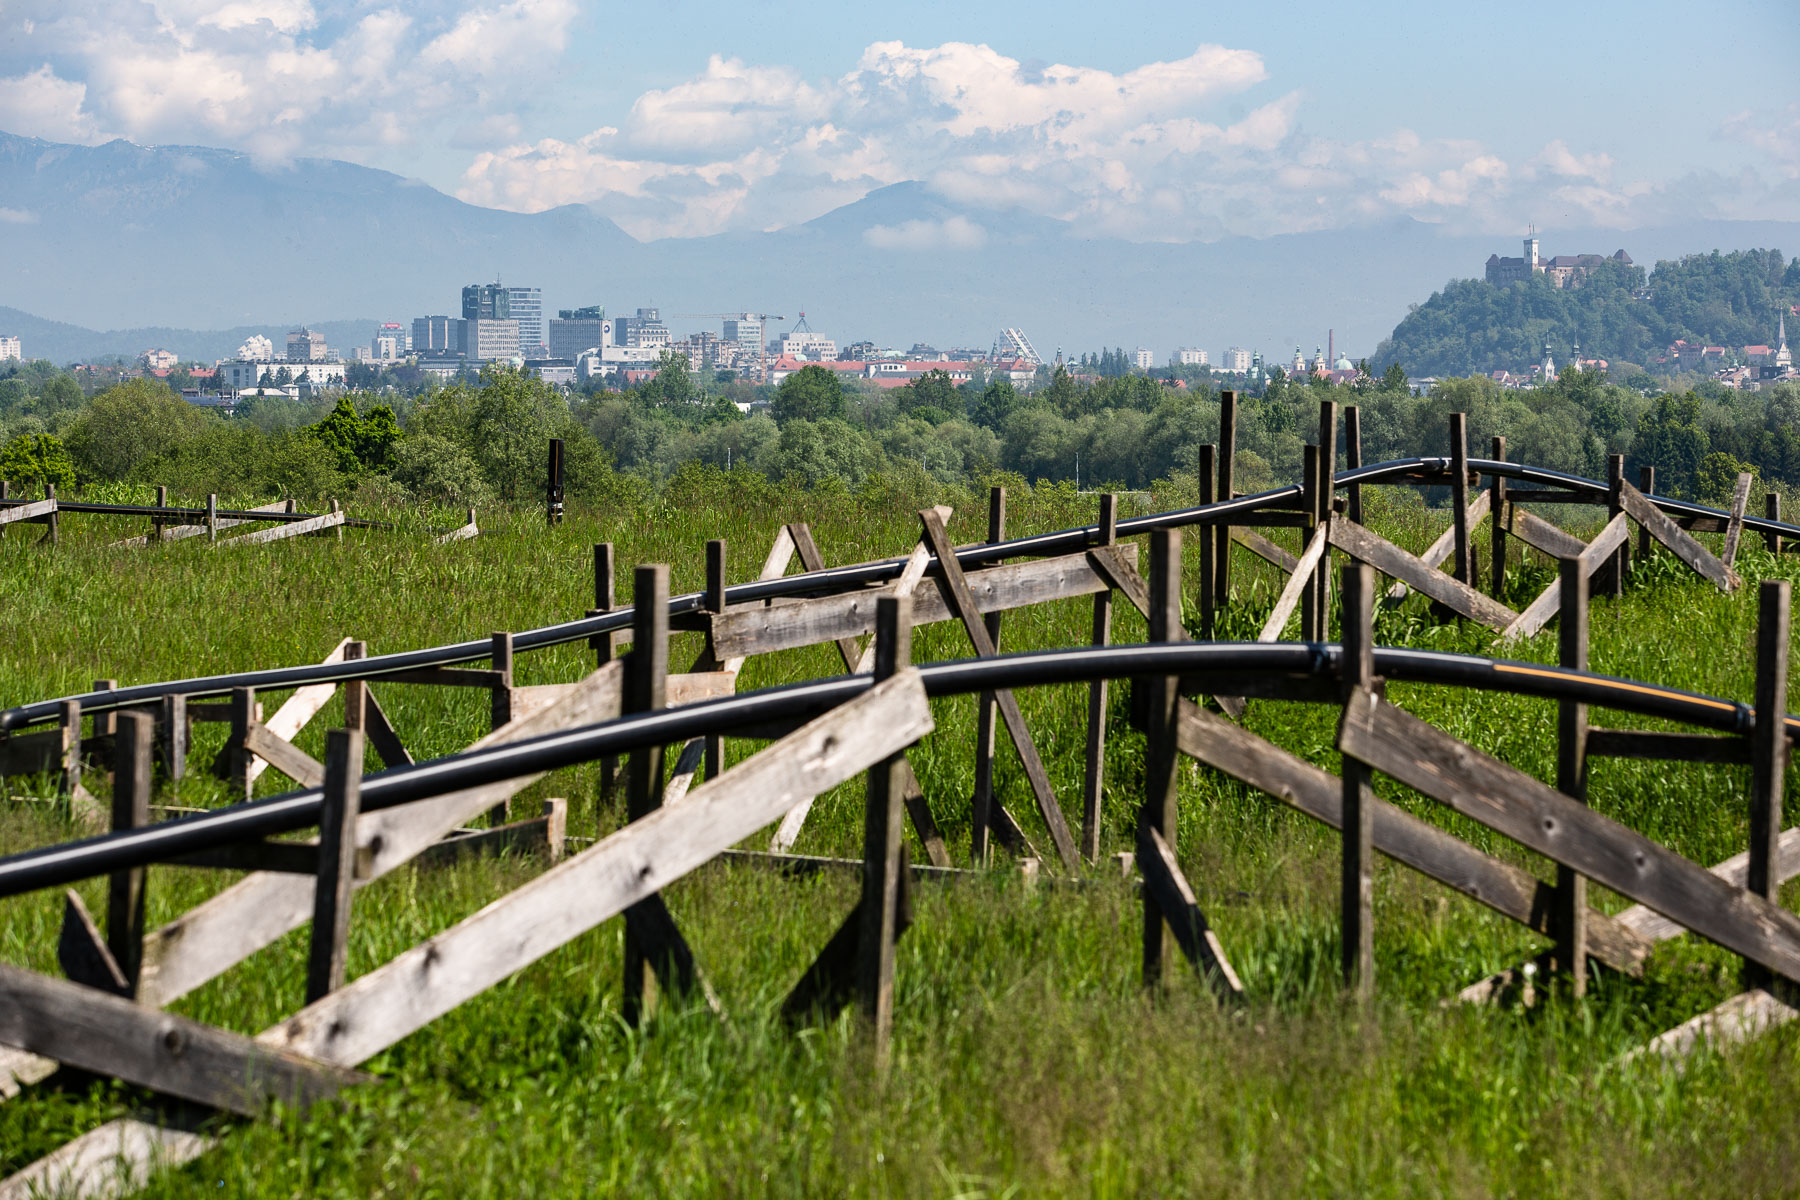 The city of Ljubljana is seen over the green hill of Ljubljana's old landfill and its methane gas pipes on May 10, 2019.